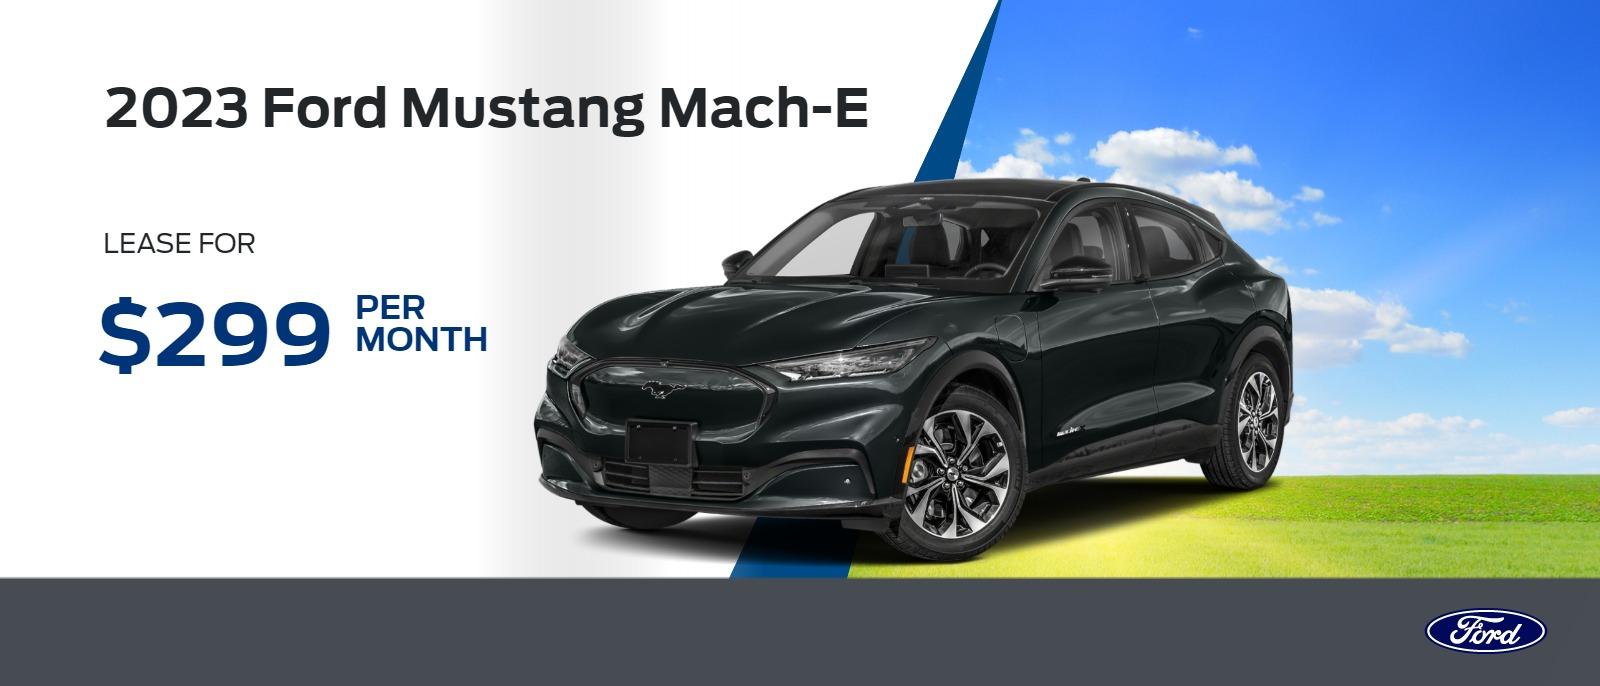 New 2023 Ford Mustang Mach-E $299/month lease